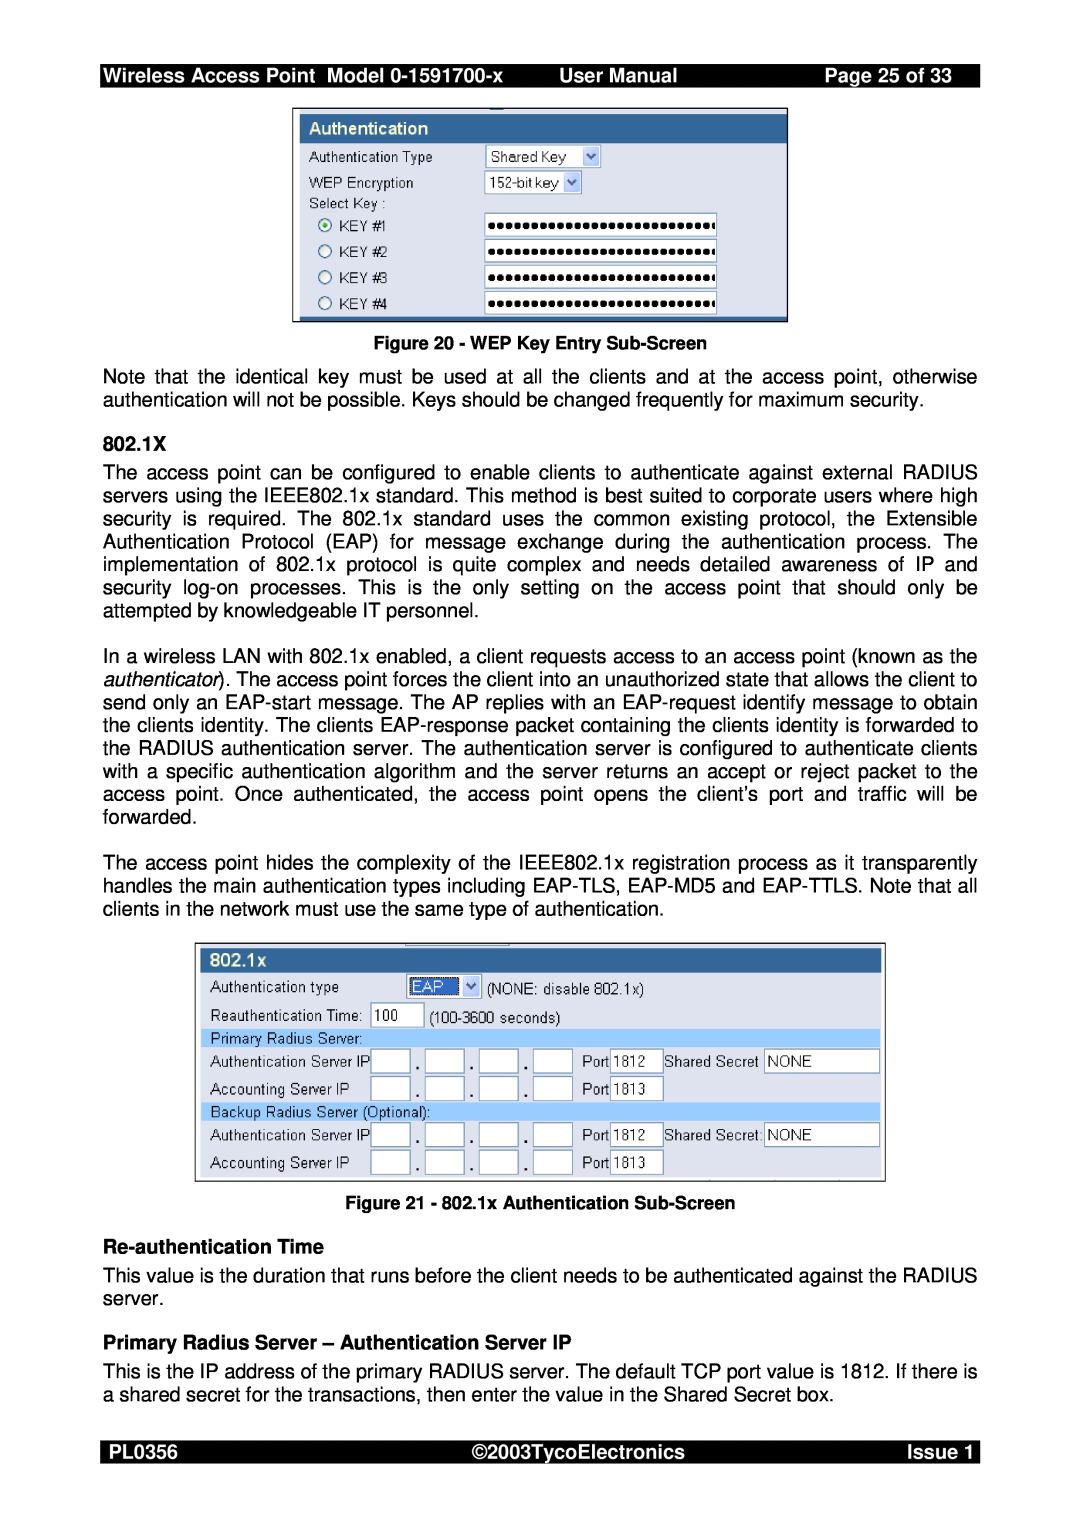 Tyco 0-1591700-x user manual Page 25 of, Wireless Access Point Model, User Manual, PL0356, 2003TycoElectronics, Issue 